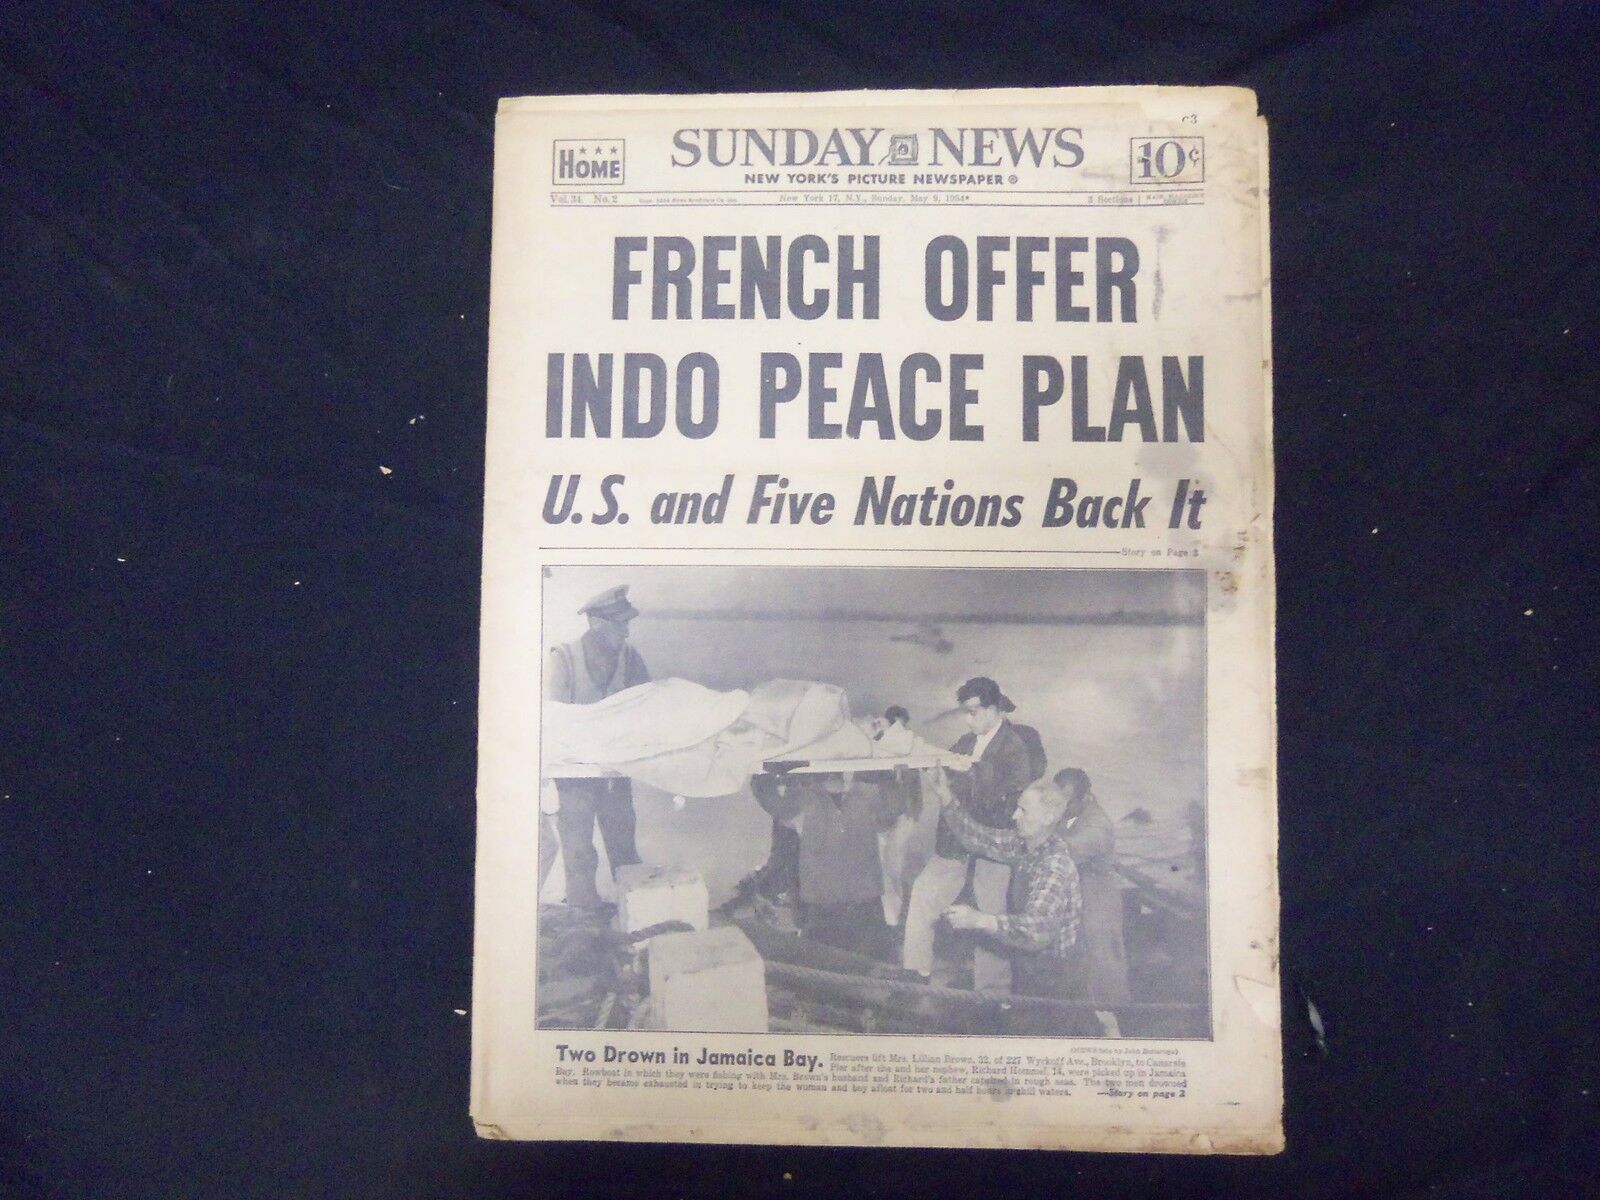 1954 MAY 9 NEW YORK DAILY NEWS - FRENCH OFFER INDO PEACE PLAN - NP 2102